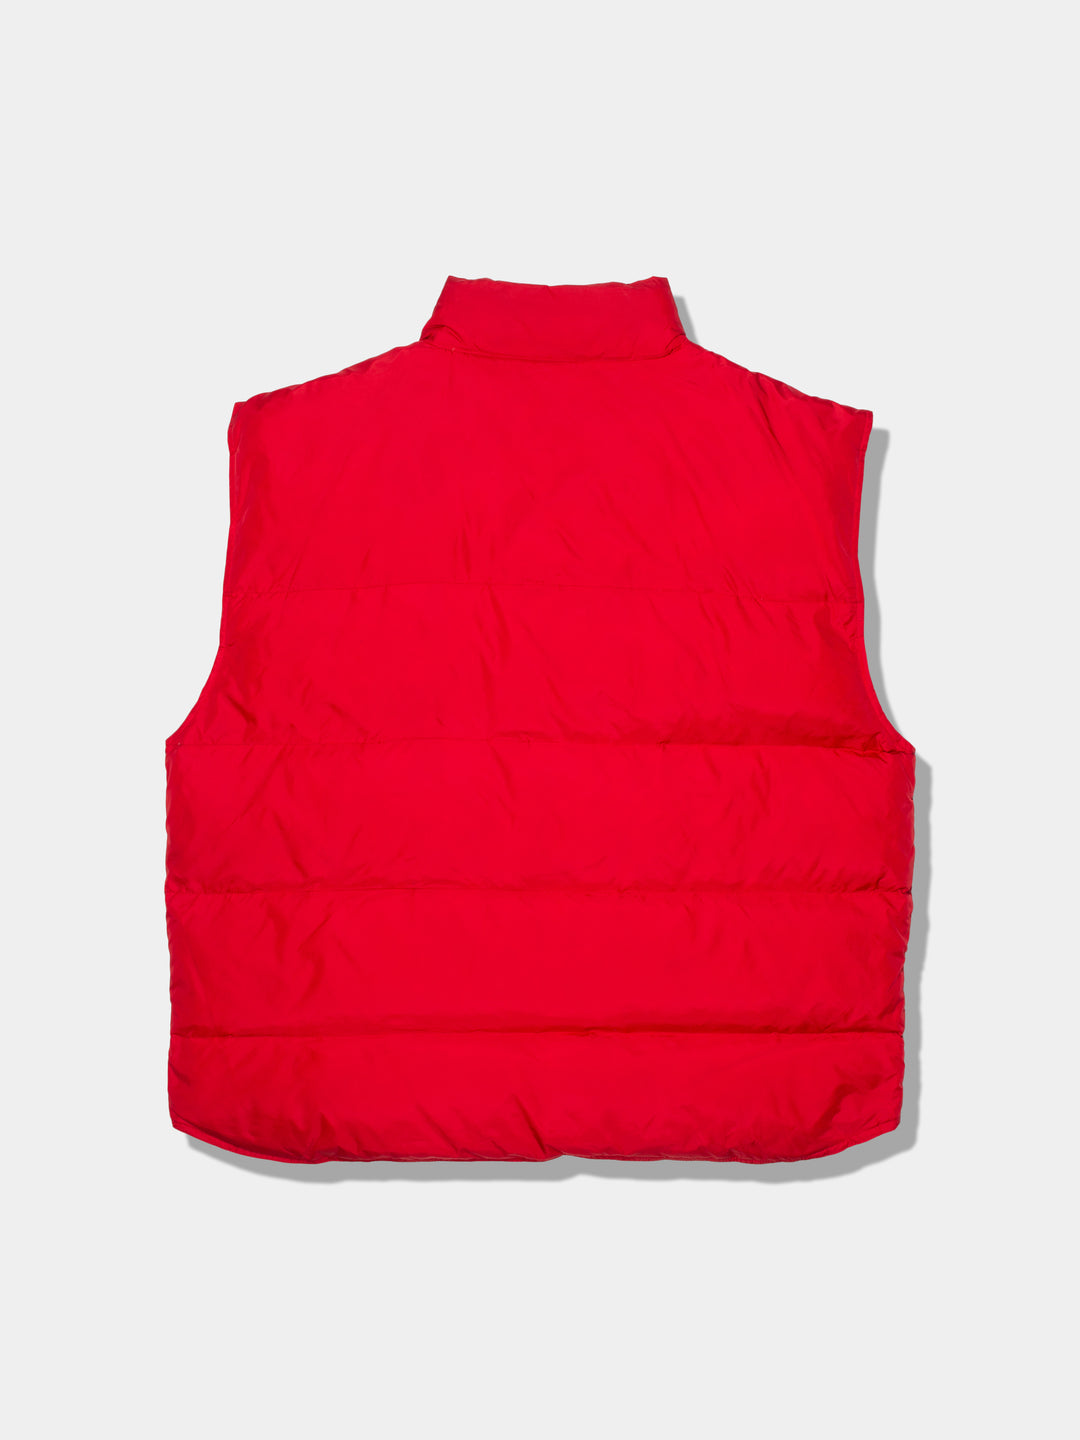 00s EMS Puffy Gillet (XL)